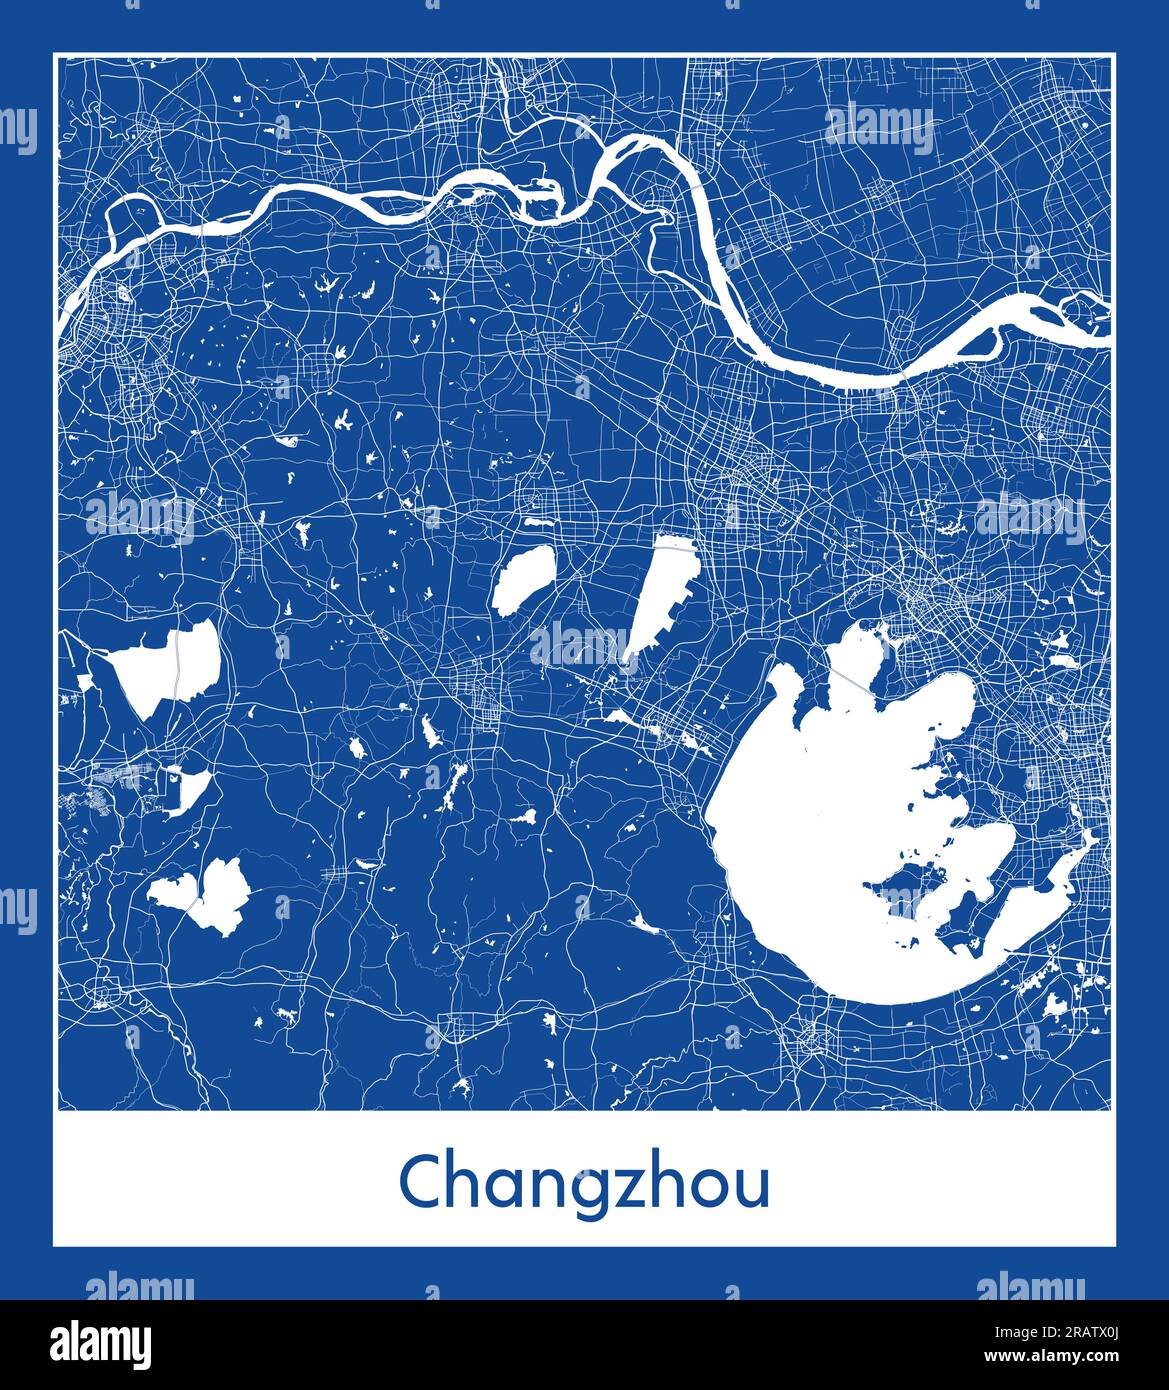 Changzhou China Asia City map blue print vector illustration Stock Vector